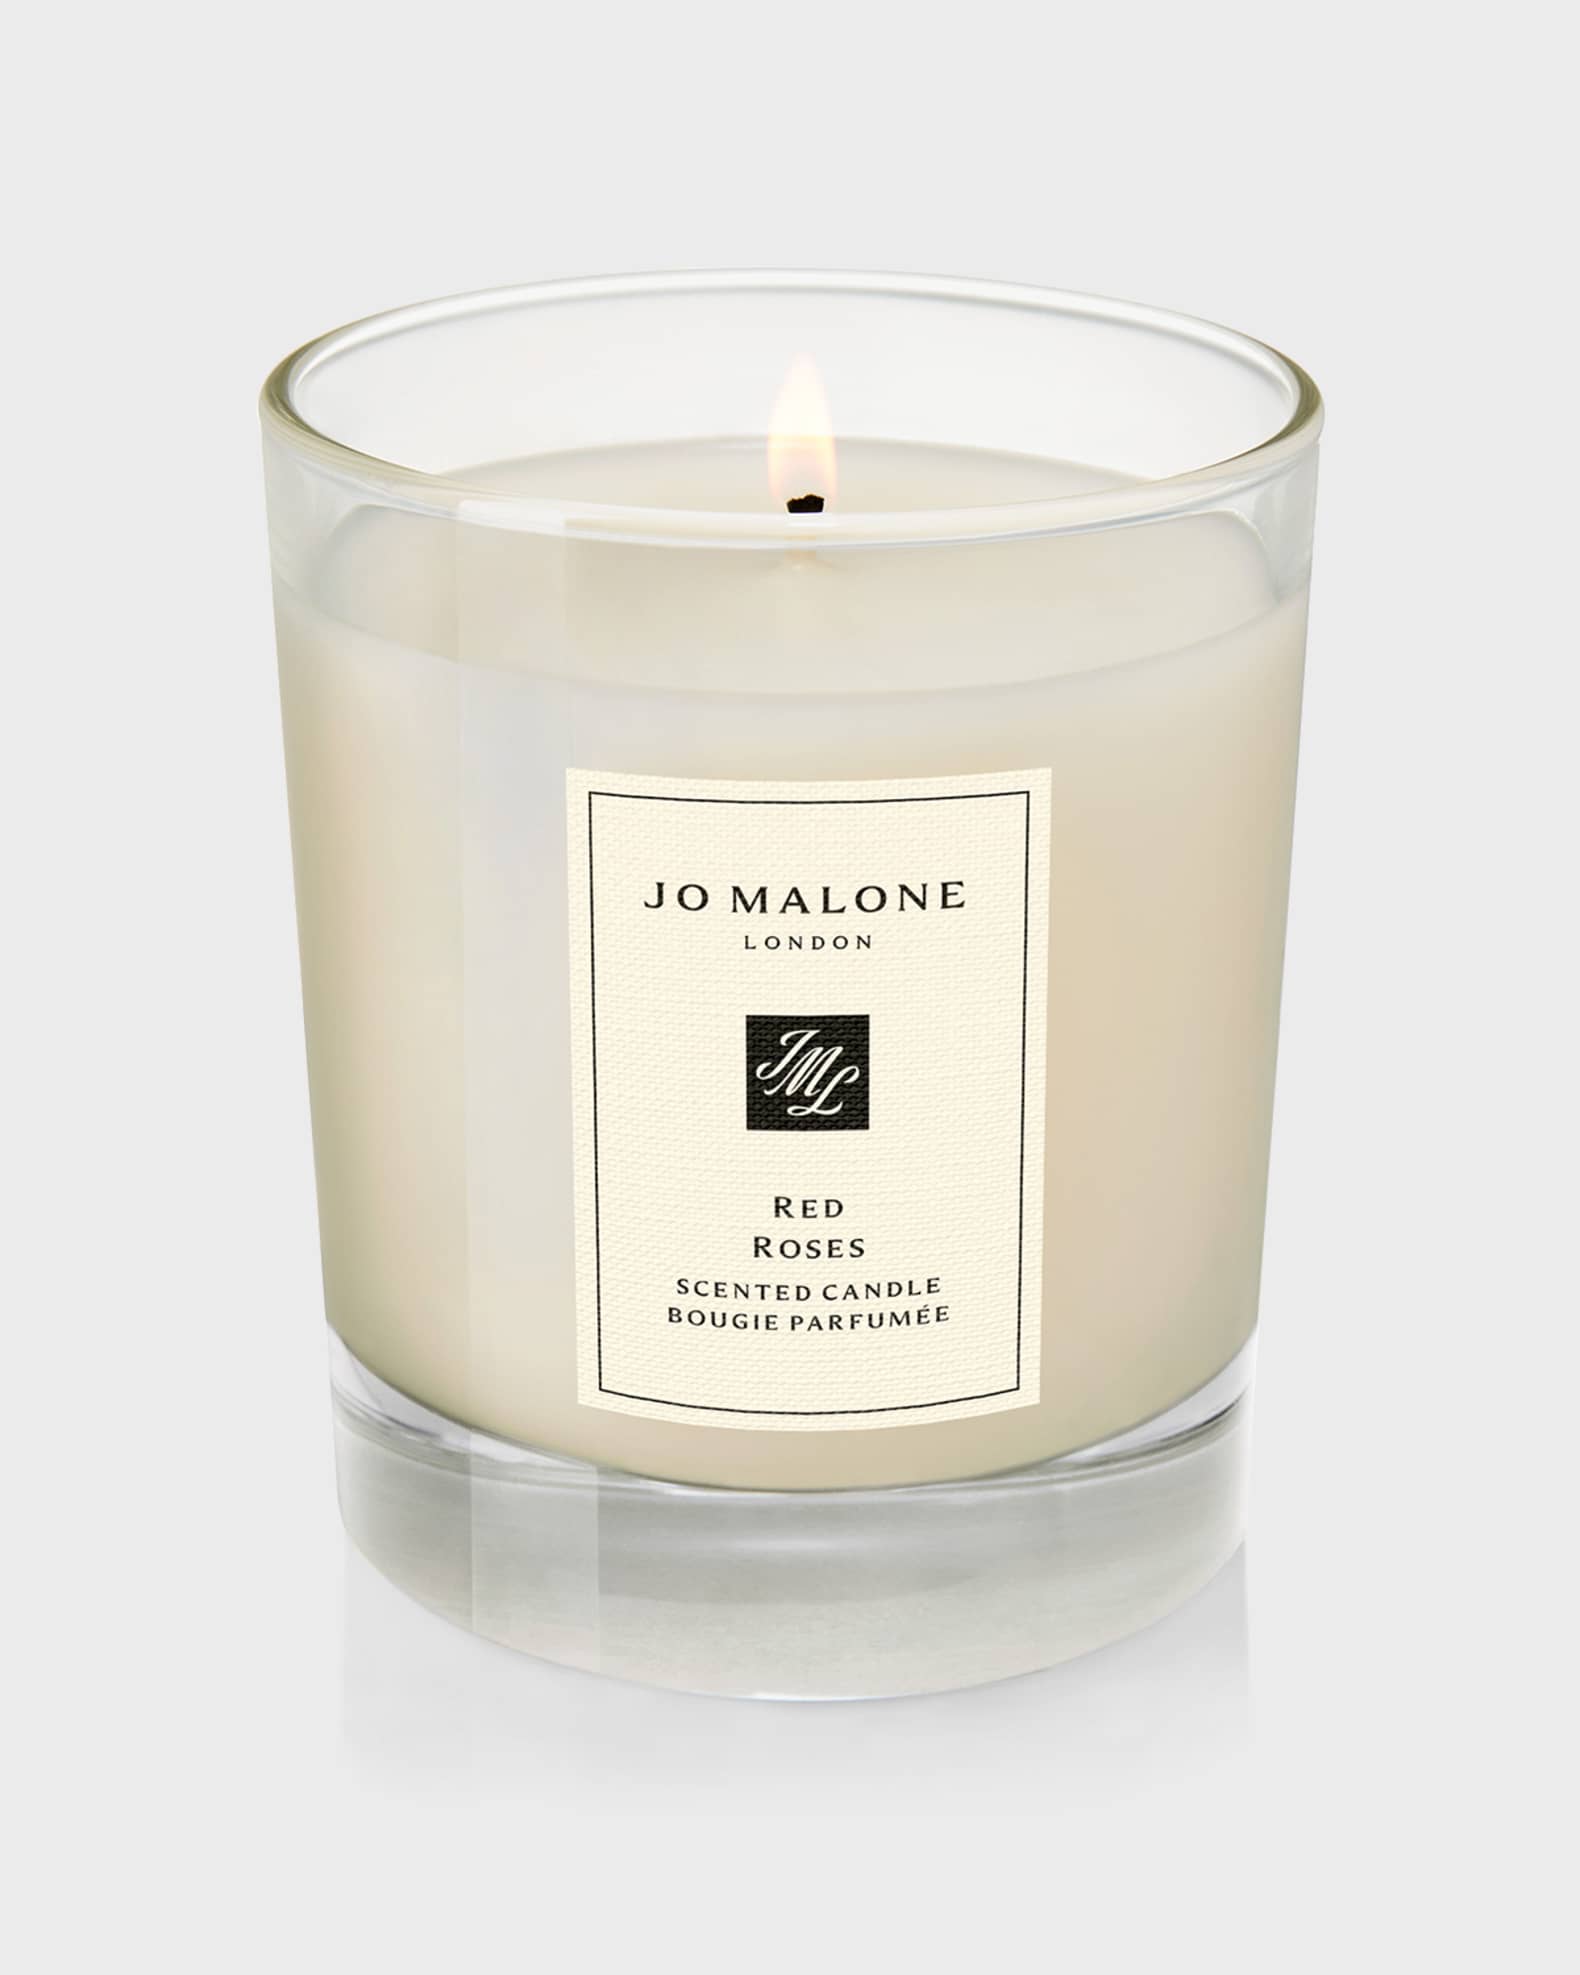 Jo Malone London 7 oz. Red Roses Home Candle | Neiman Marcus